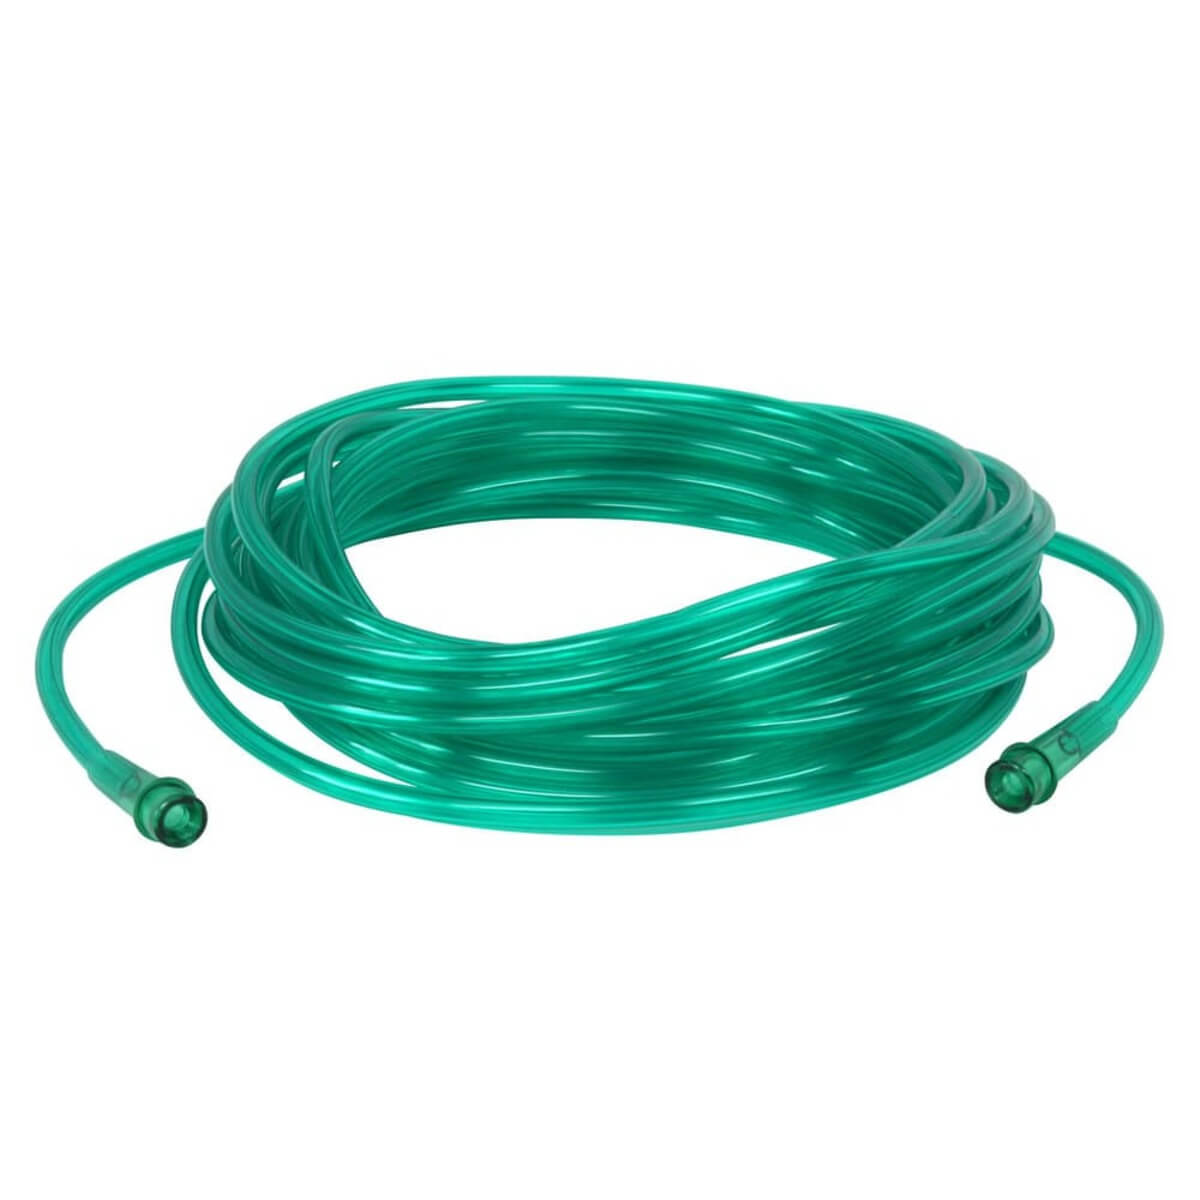 Green Oxygen Supply Tubing 25ft Green Tubing For Oxygen Concentrator